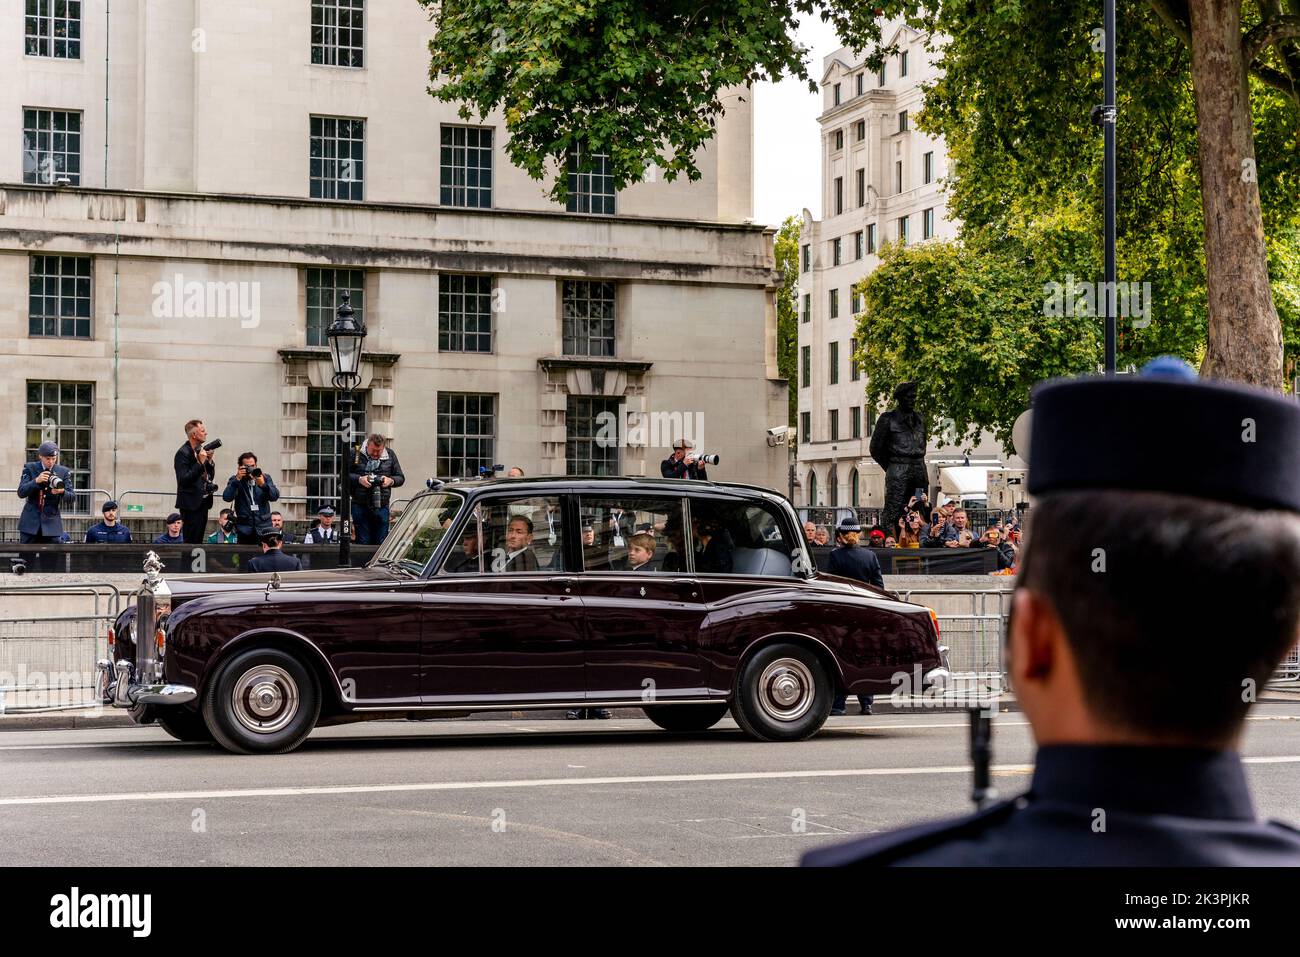 The Royal Car With The Princess of Wales, The Queen Consort and Prince George Take Part In The Queen Elizabeth II Funeral Procession, London, UK. Stock Photo